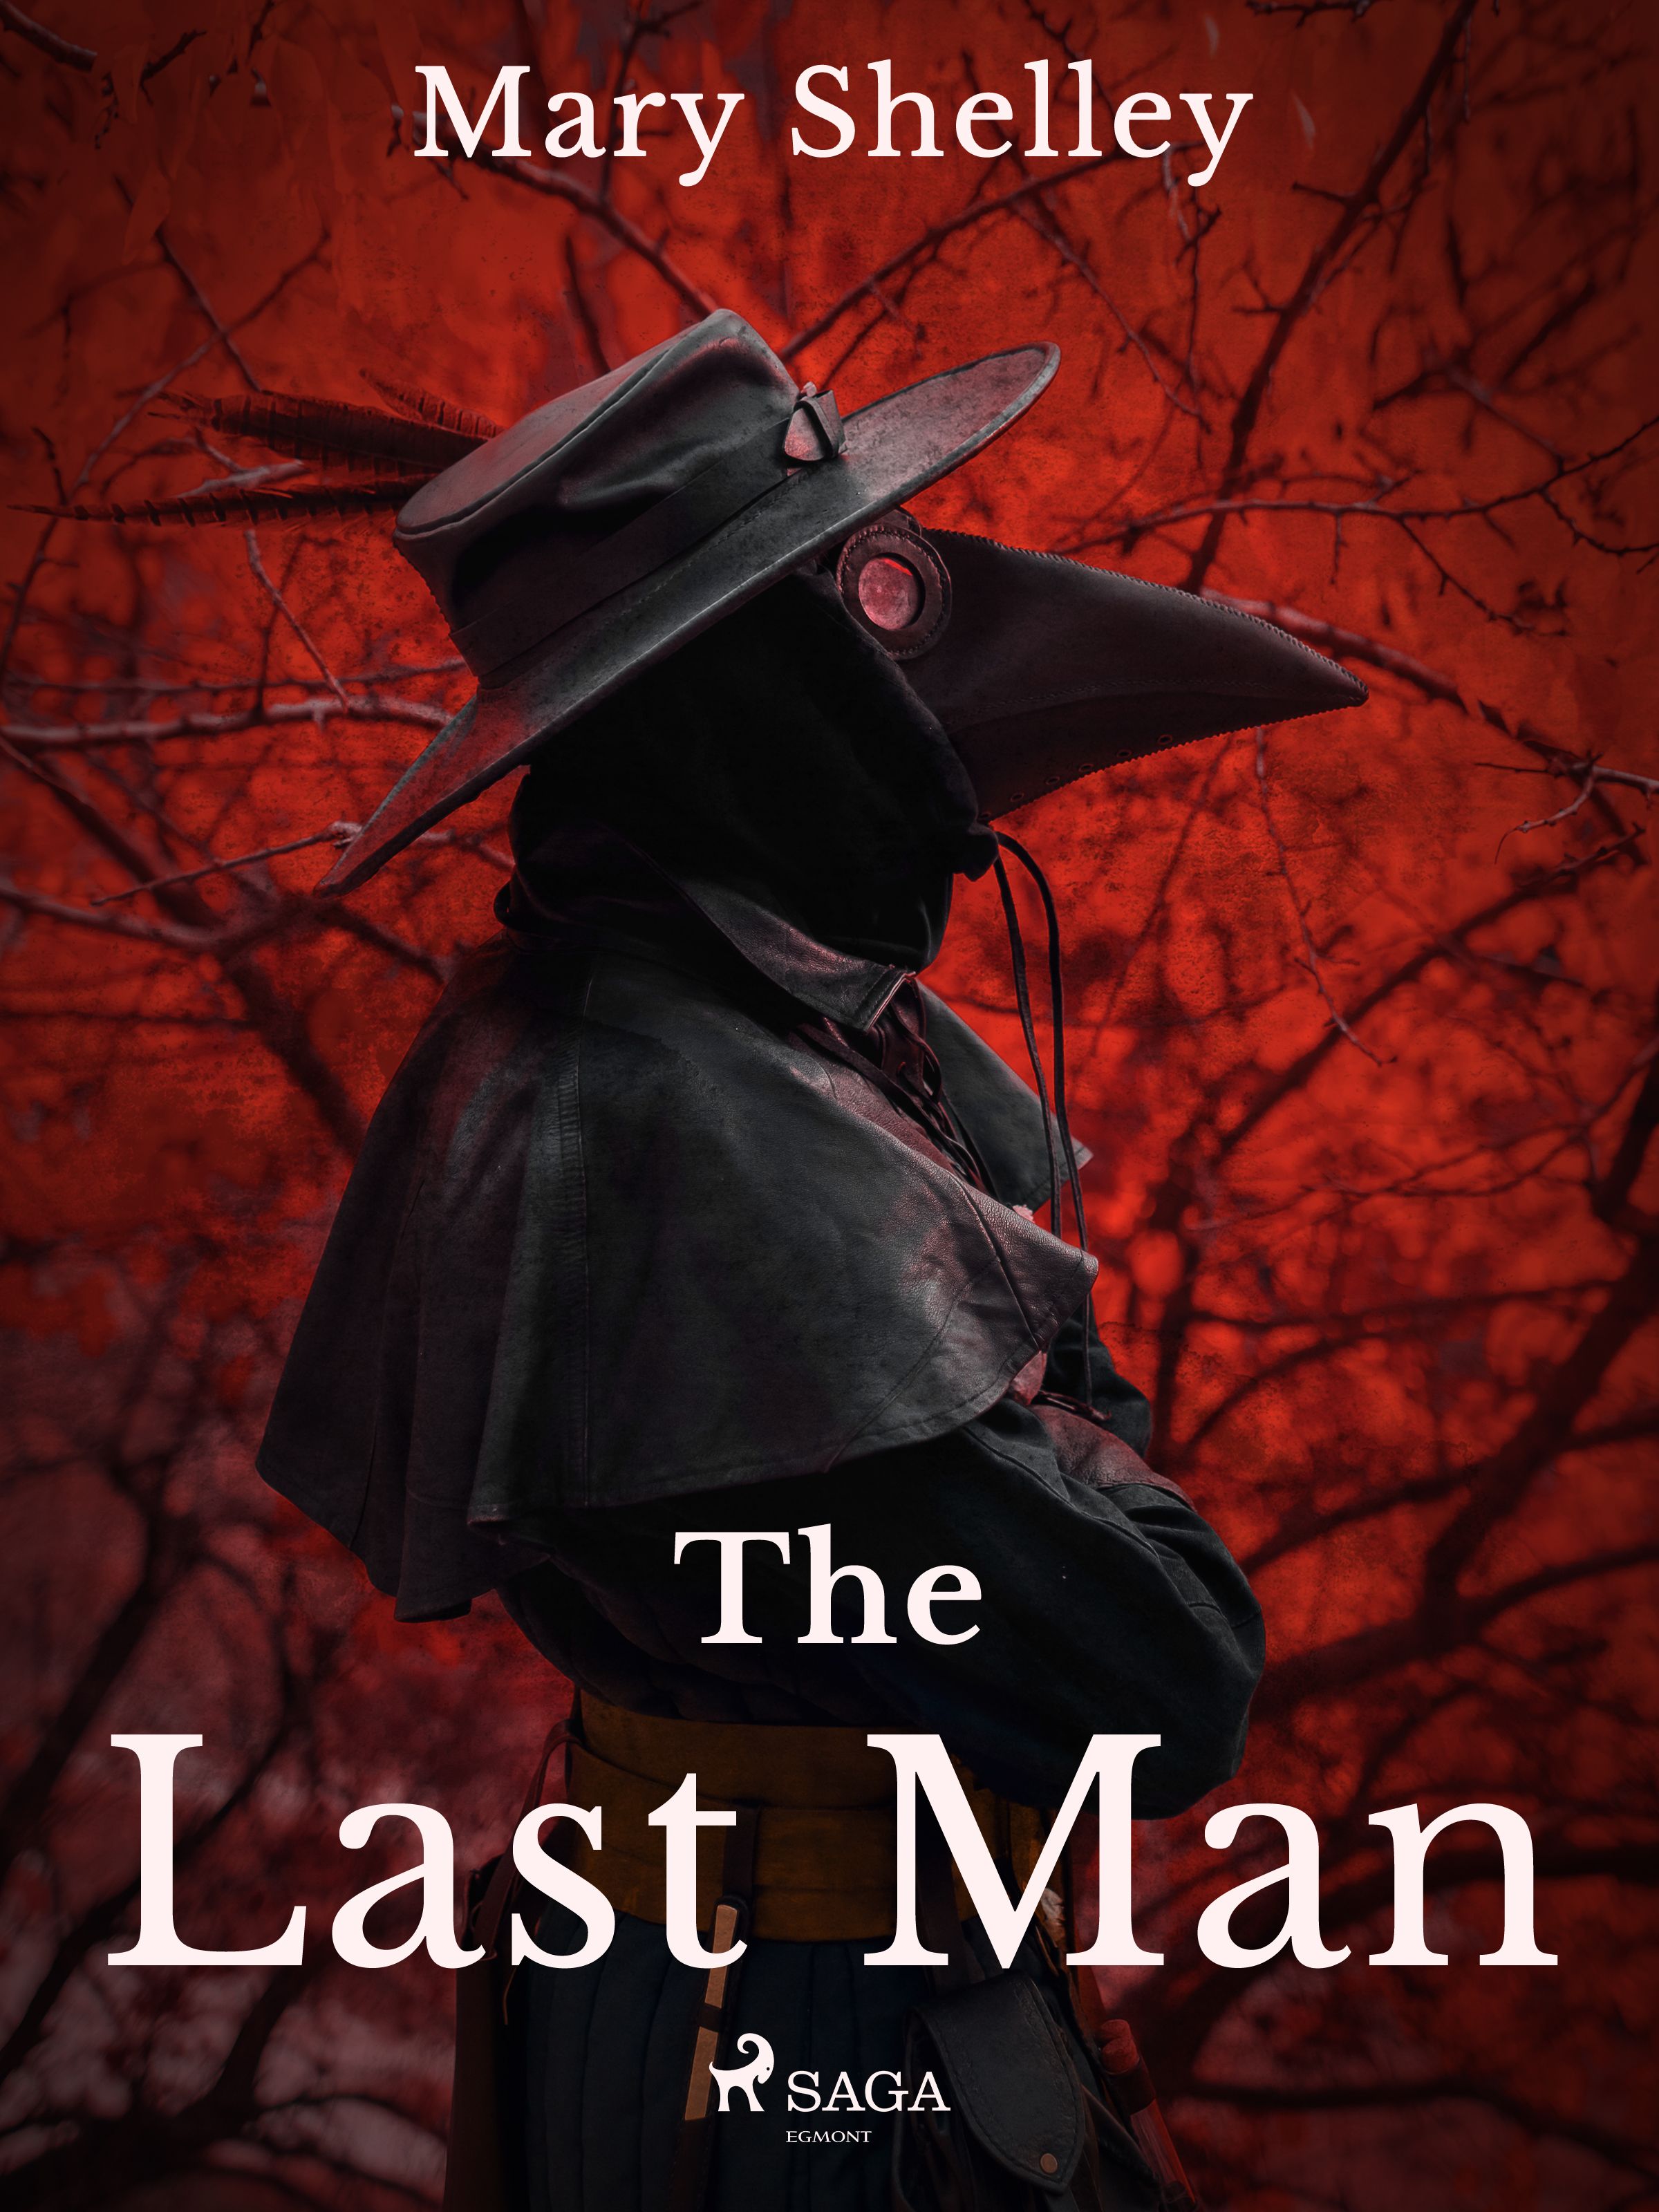 The Last Man, eBook by Mary Shelley